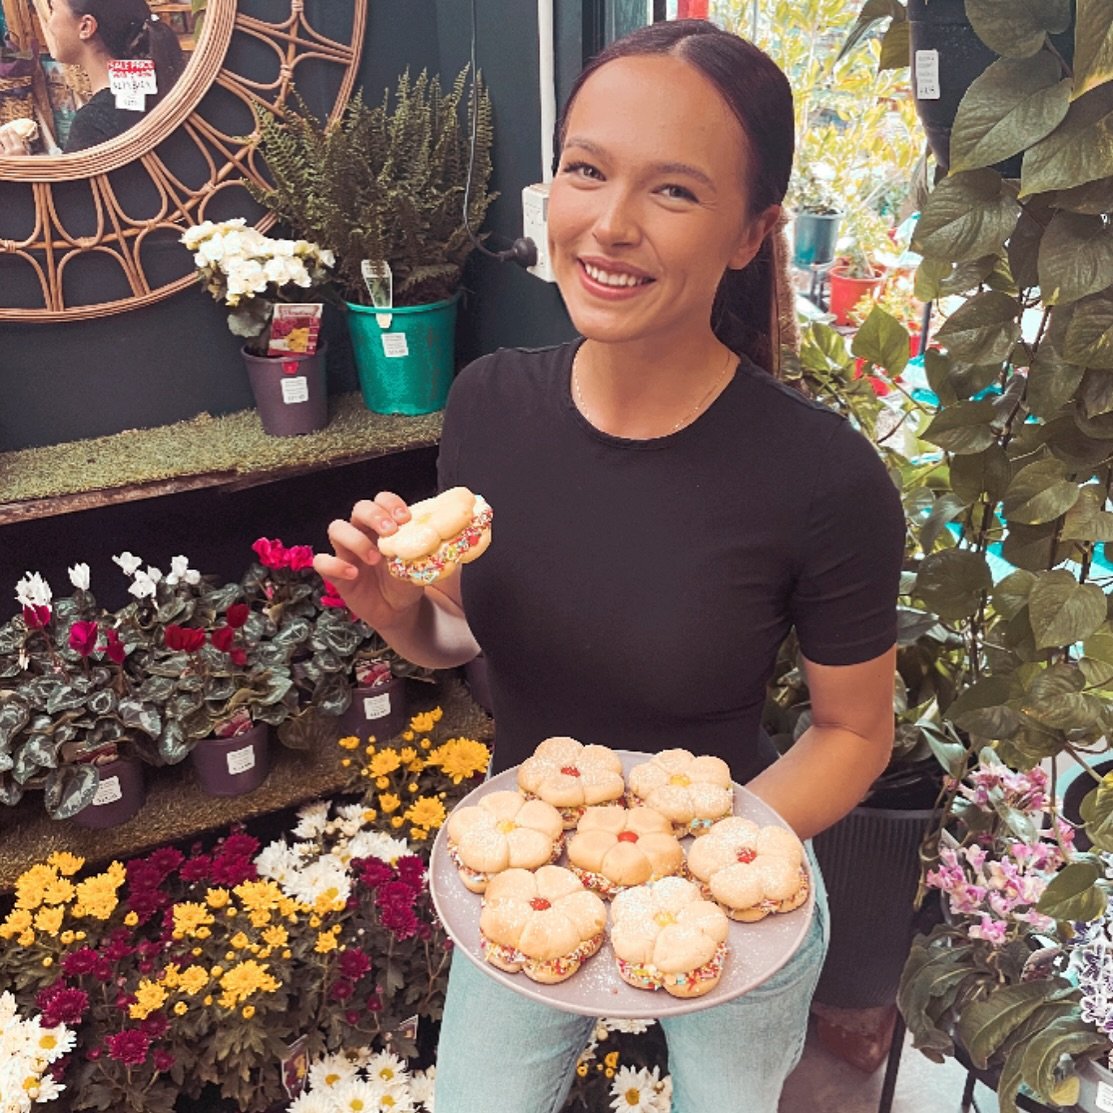 We love daisy so much we made daisy biscuits. Here&rsquo;s daisy eating her daisy biscuit 🌼 Open til 3pm today🌼  #floraontenth